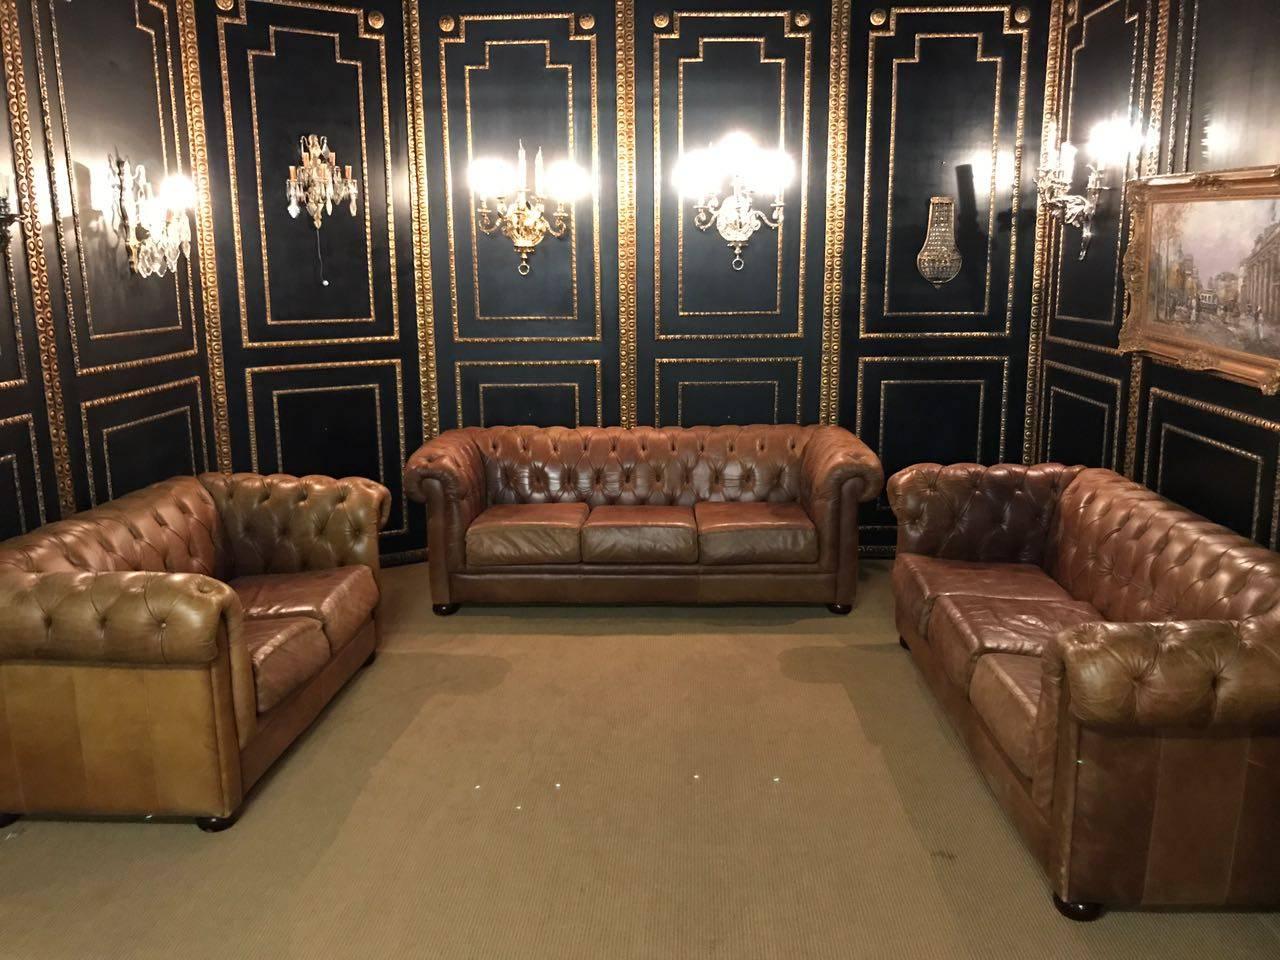 Two three-seat sofas and one double sofa, genuine leather beautiful patina

Dimensions of three-seat sofa:
Height 80 cm
Width 215 cm
Depth 90 cm
Seat Height 50 cm


Dimensions of three-seat sofa:
Height 80 cm
Width 156 cm
Depth 90